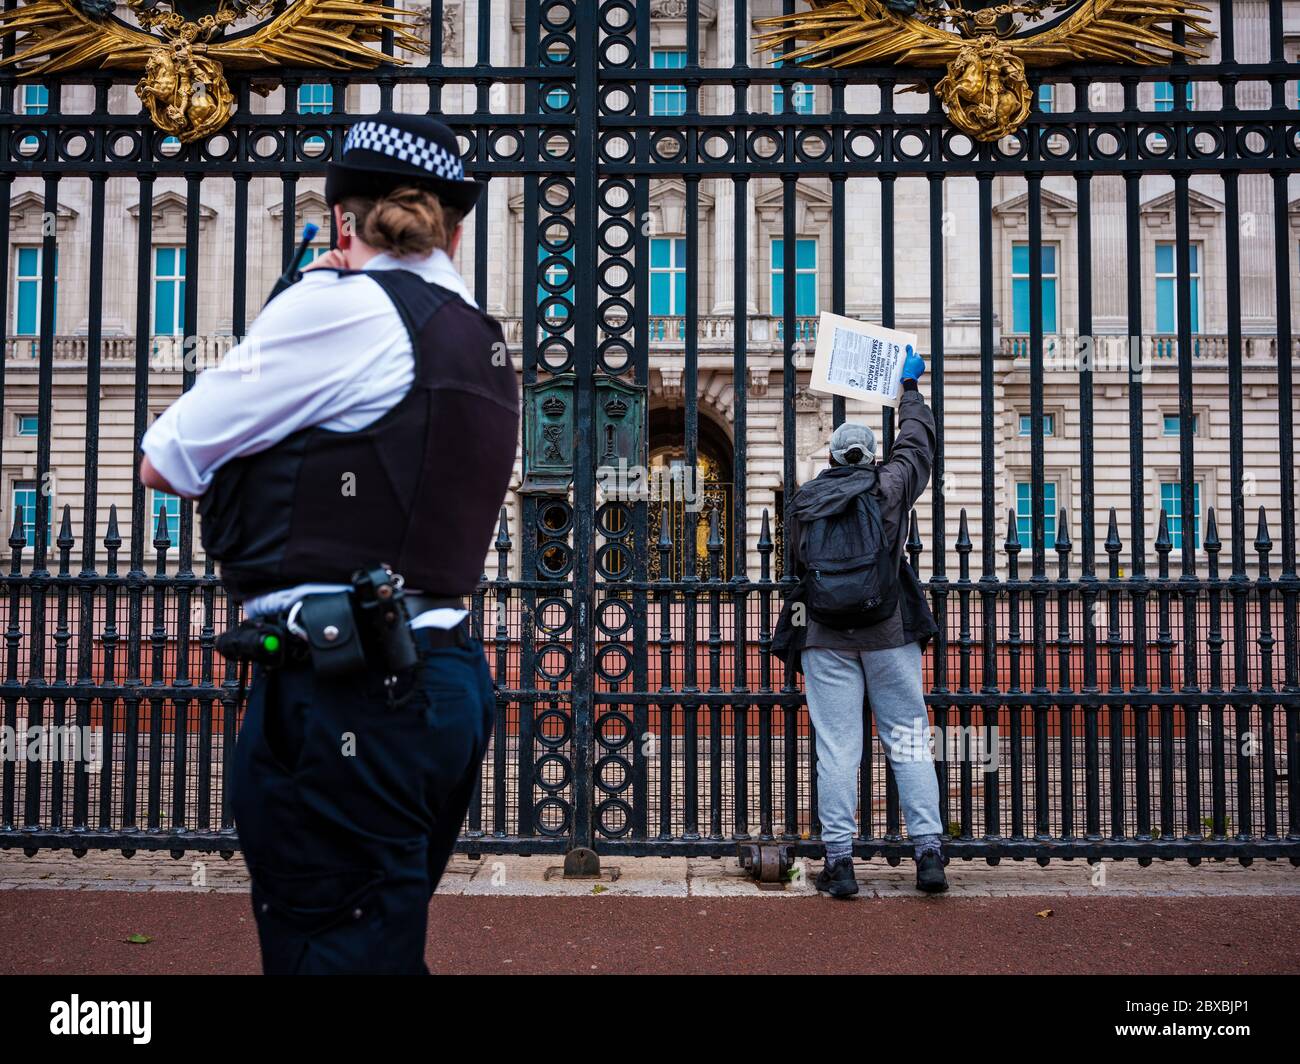 London, UK. 6th June, 2020. A Protestor shouts through the gates at a police offer outside Buckingham Palace during the Black Lives Matter Protest in London on the 6th June 2020, In memory of George Floyd who was killed on the 25th May while in police custody in the US city of Minneapolis. Credit: Yousef Al Nasser/Alamy Live News. Stock Photo